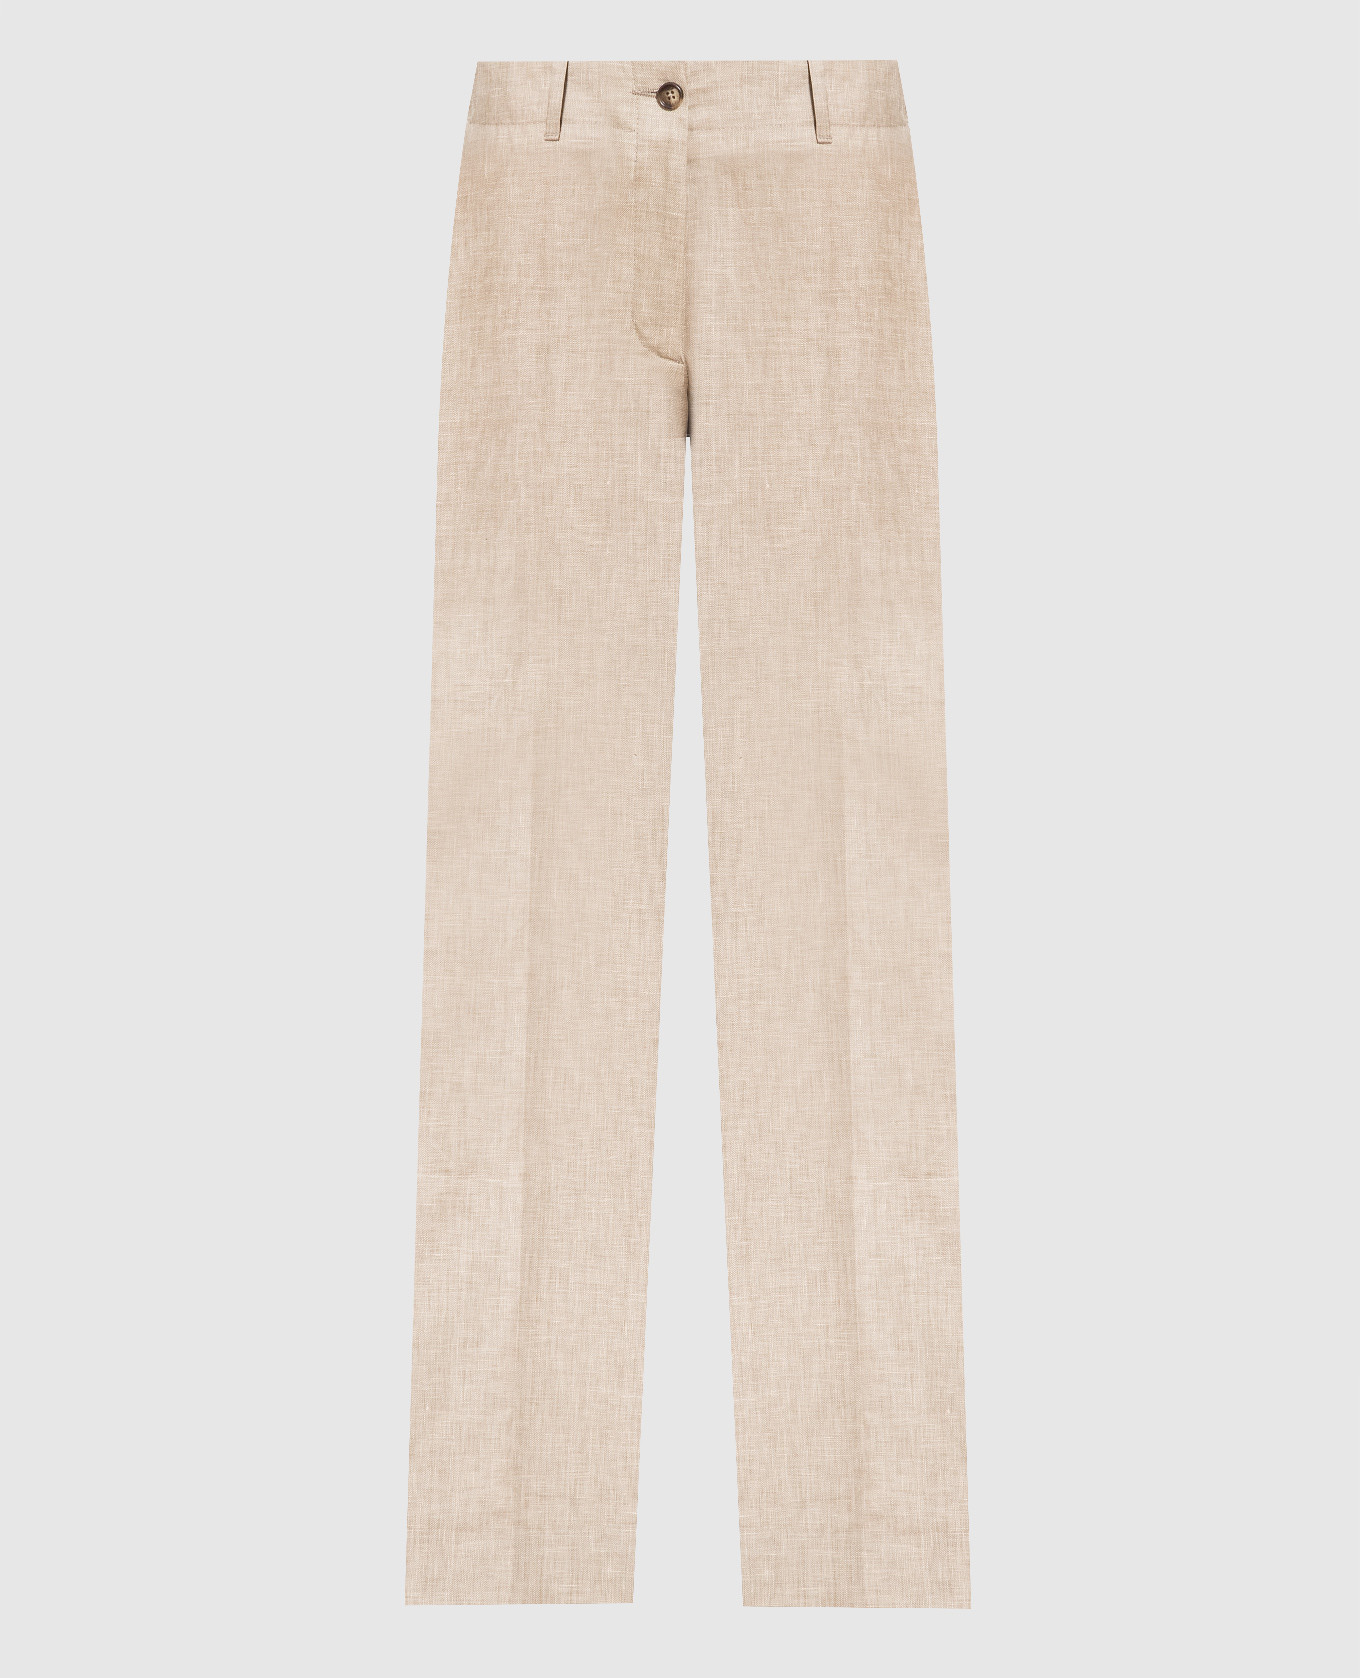 Brown trousers made of linen, wool and silk